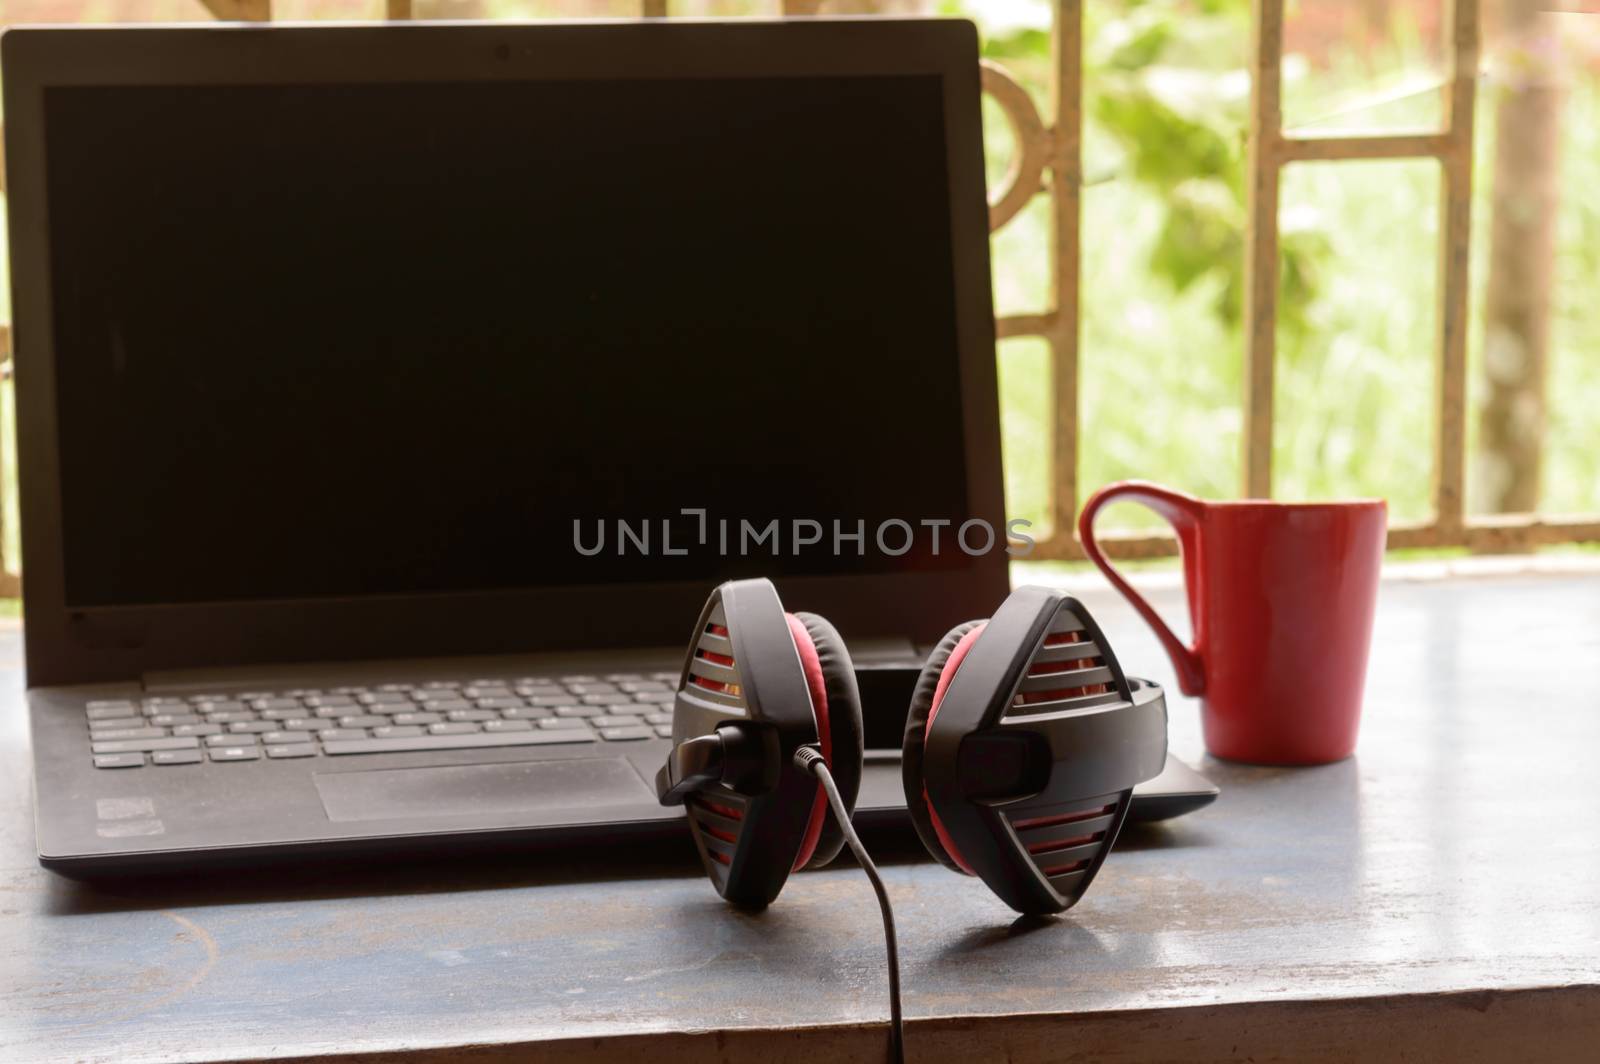 Portable over-ear Binaural Sound USB Headset with Microphone Noise Cancelling and Ultrasonic Volume Adjuster Headphone for Computer, Skype placed near laptop on window sunlight in morning. Red Cup of Coffee at a distance. Stay home, Work from home, Remote Work, Business Continuity background.